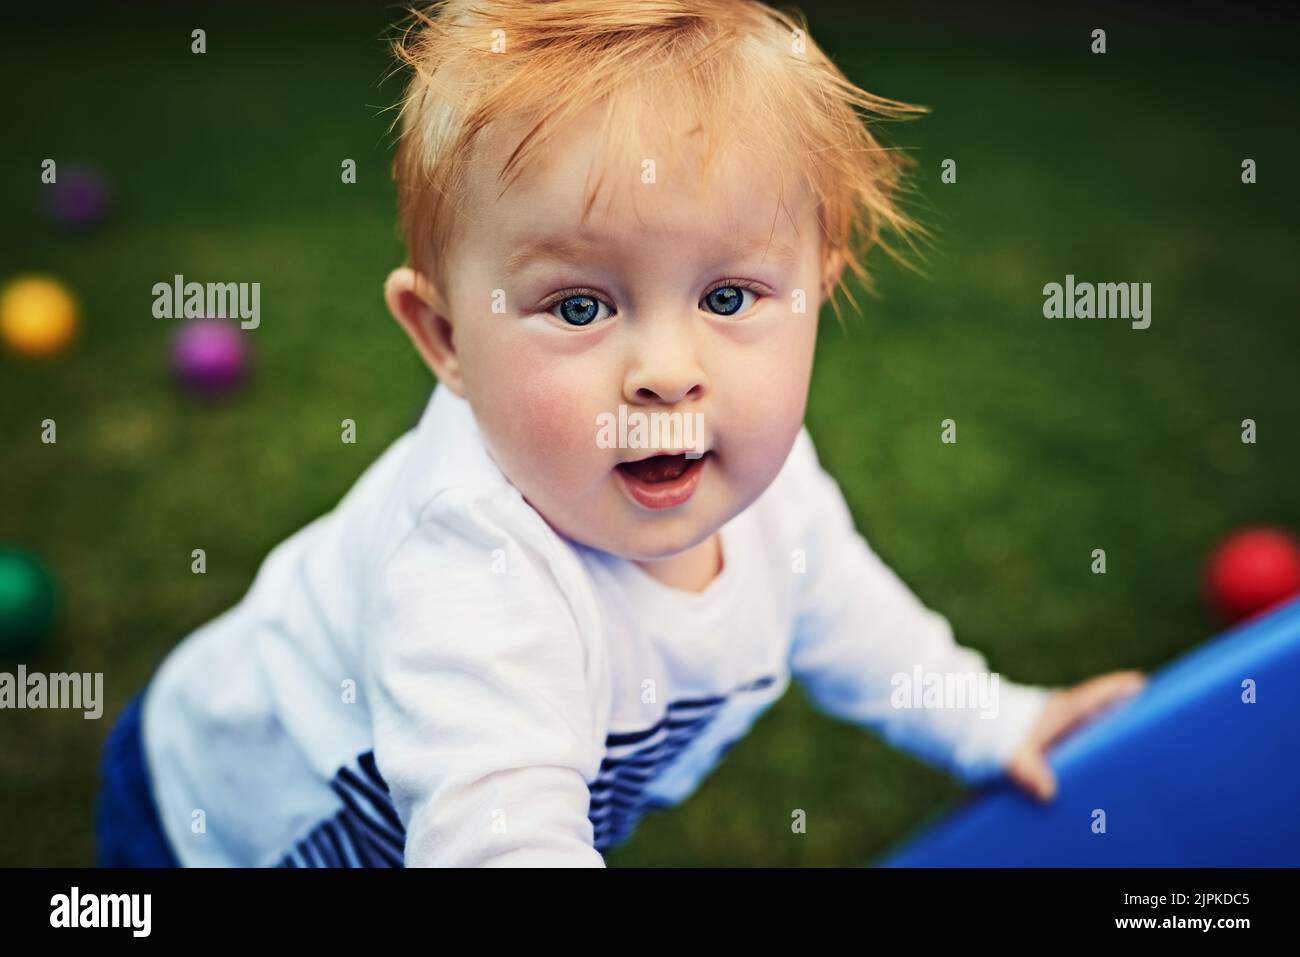 There is much fun to be had. an adorable little boy playing in the backyard. Stock Photo